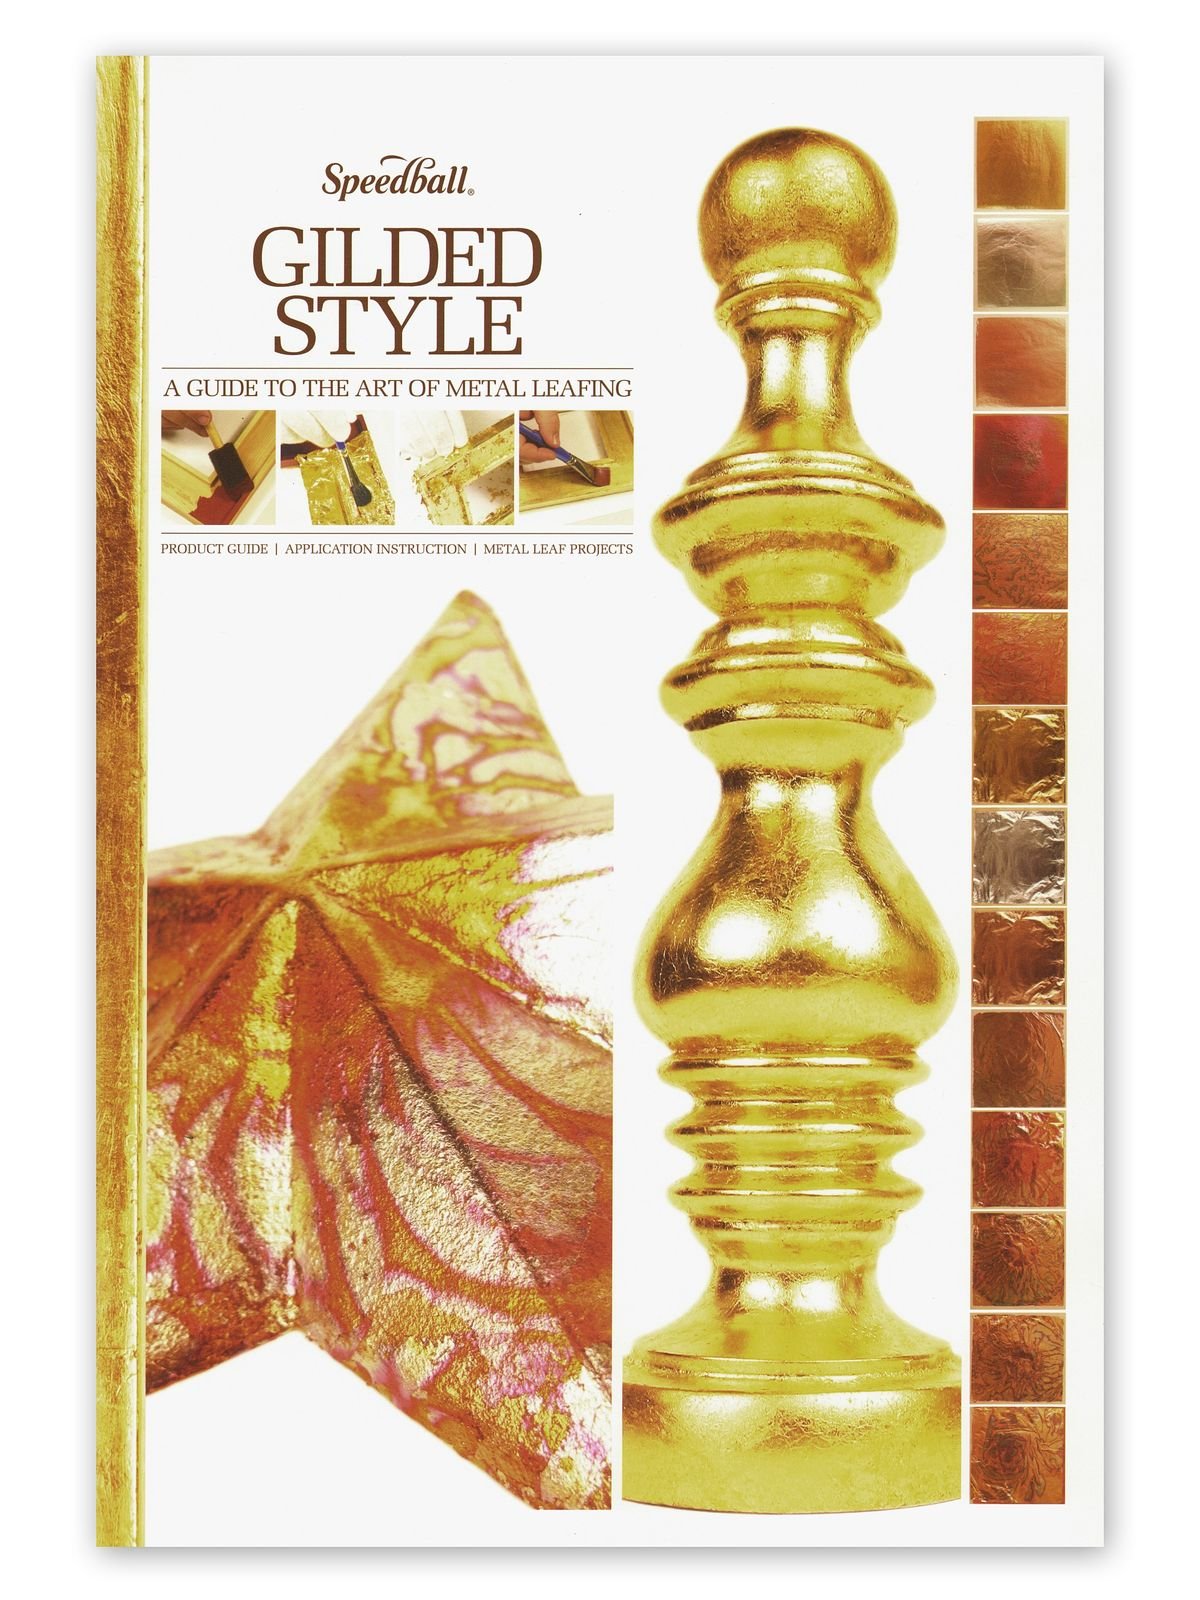 Gilded Style: A Guide to The Art of Metal Leafing